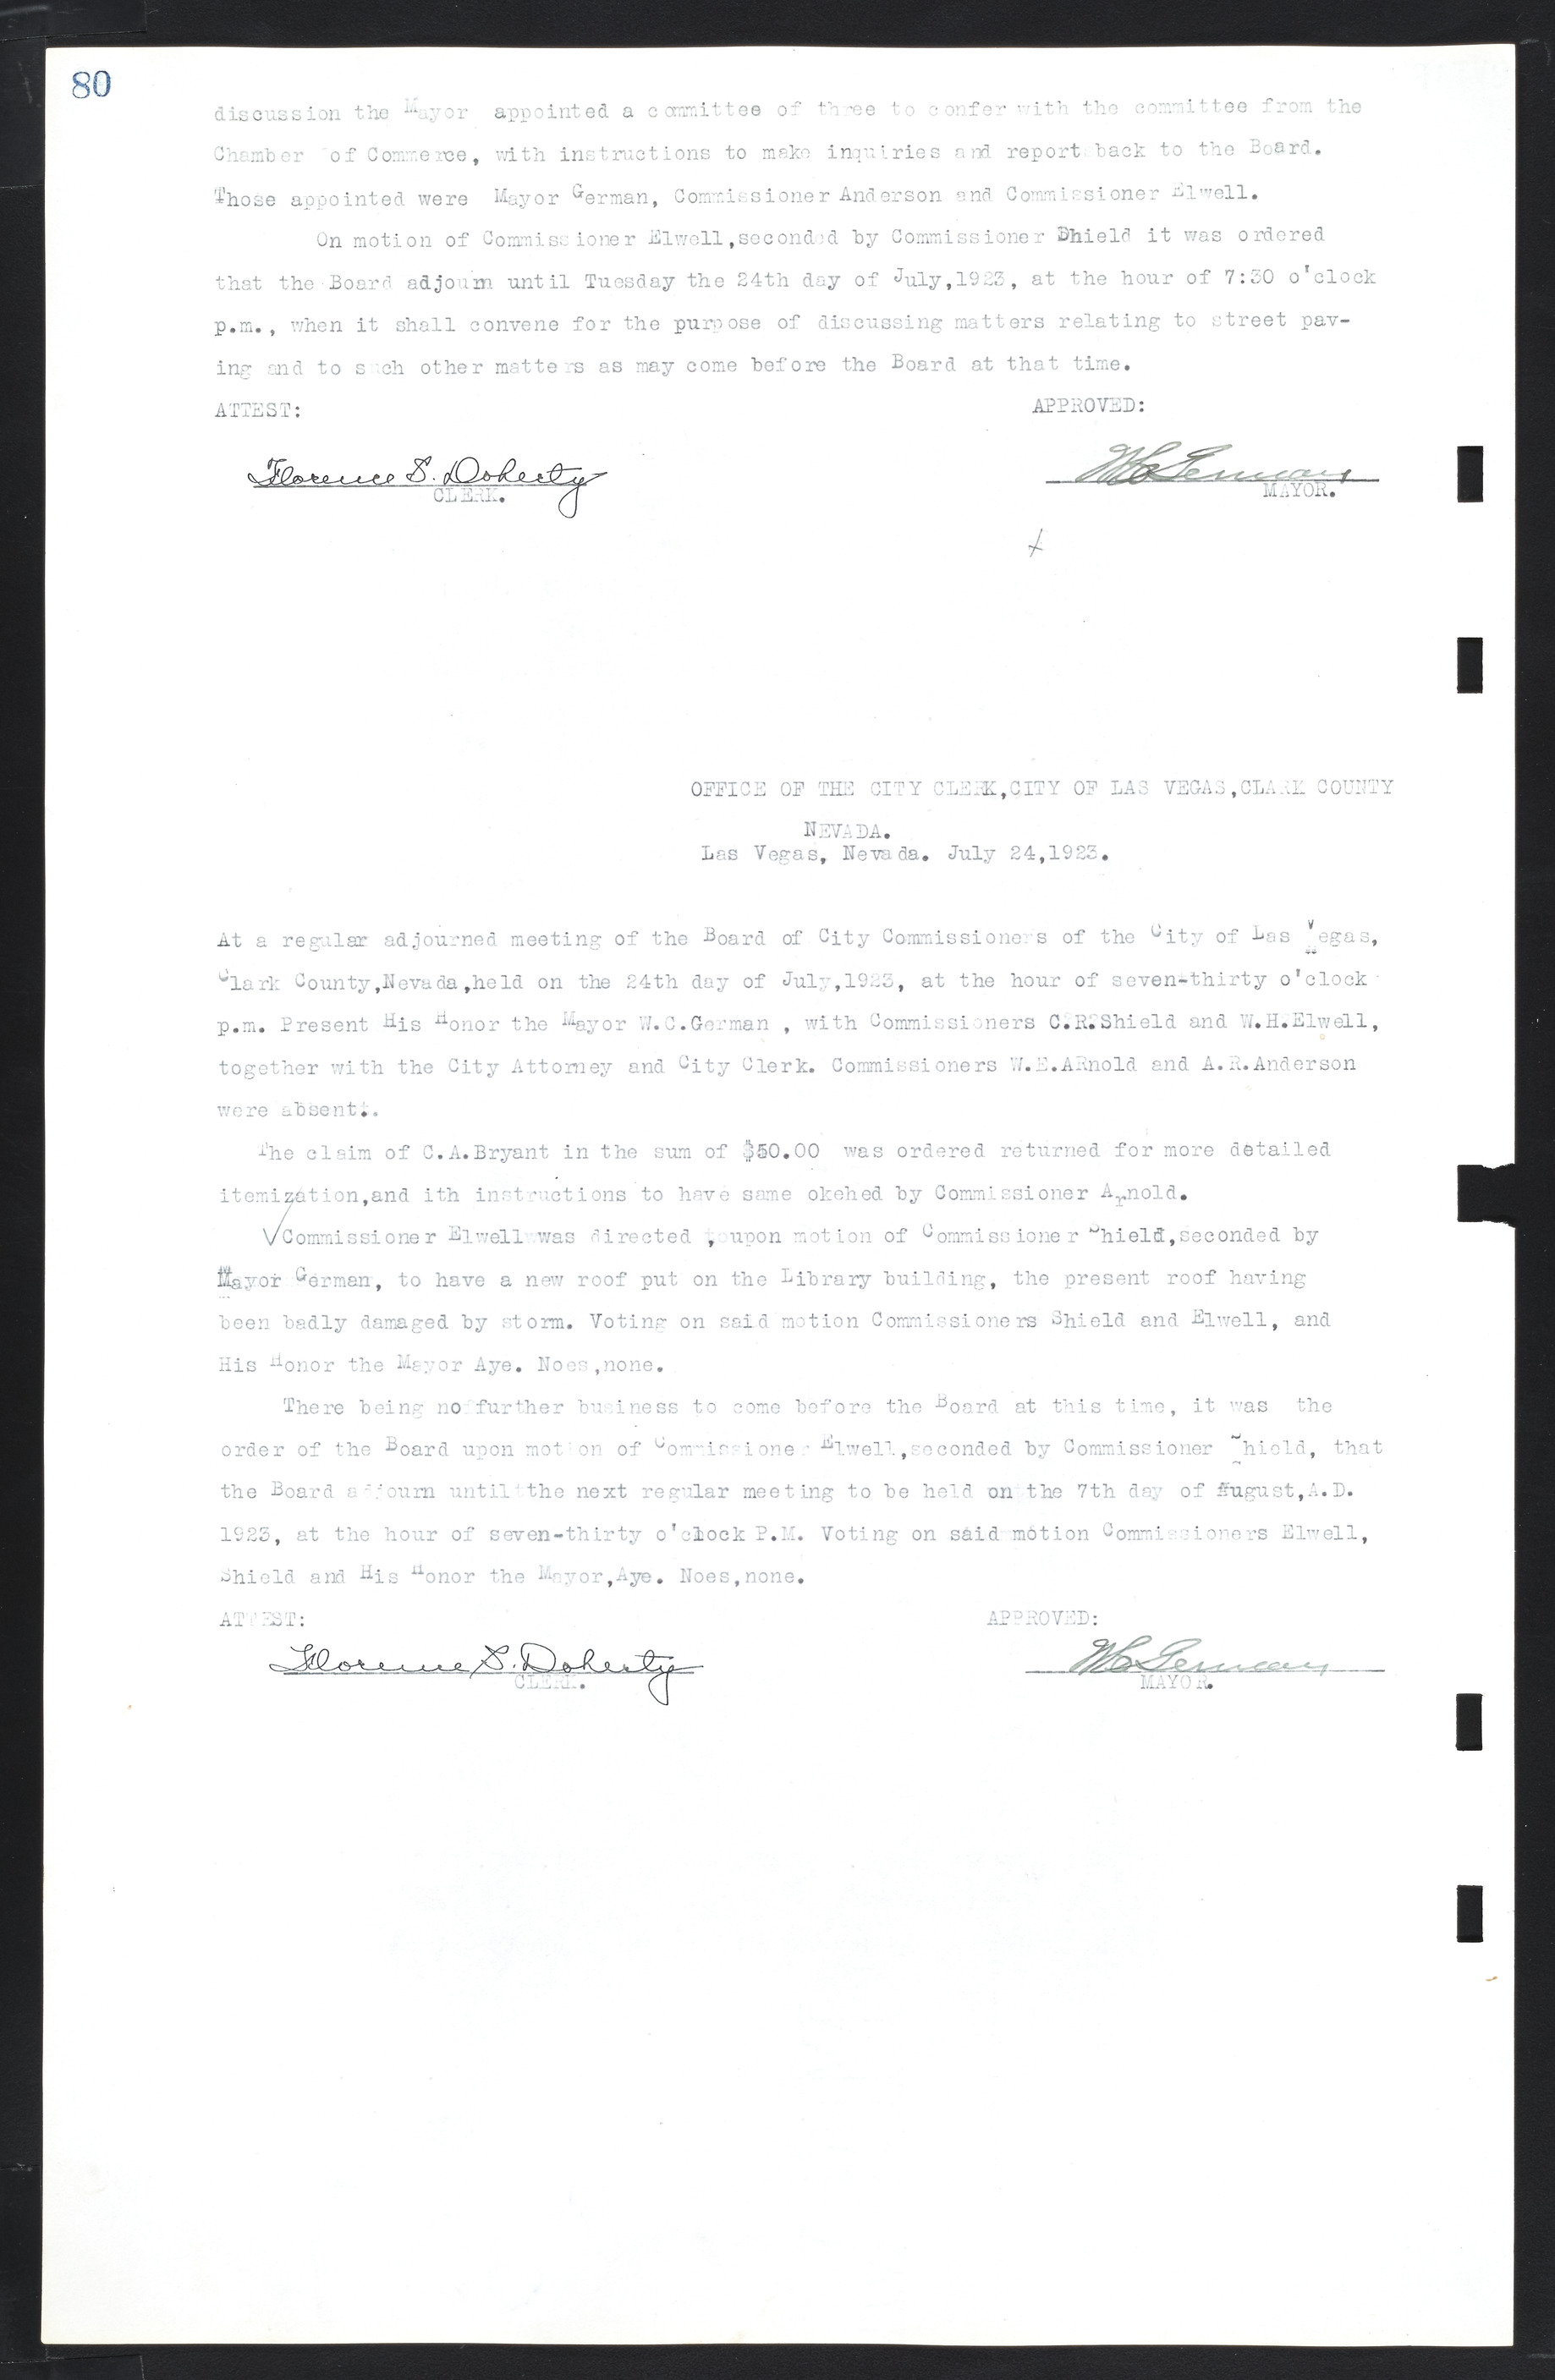 Las Vegas City Commission Minutes, March 1, 1922 to May 10, 1929, lvc000002-87